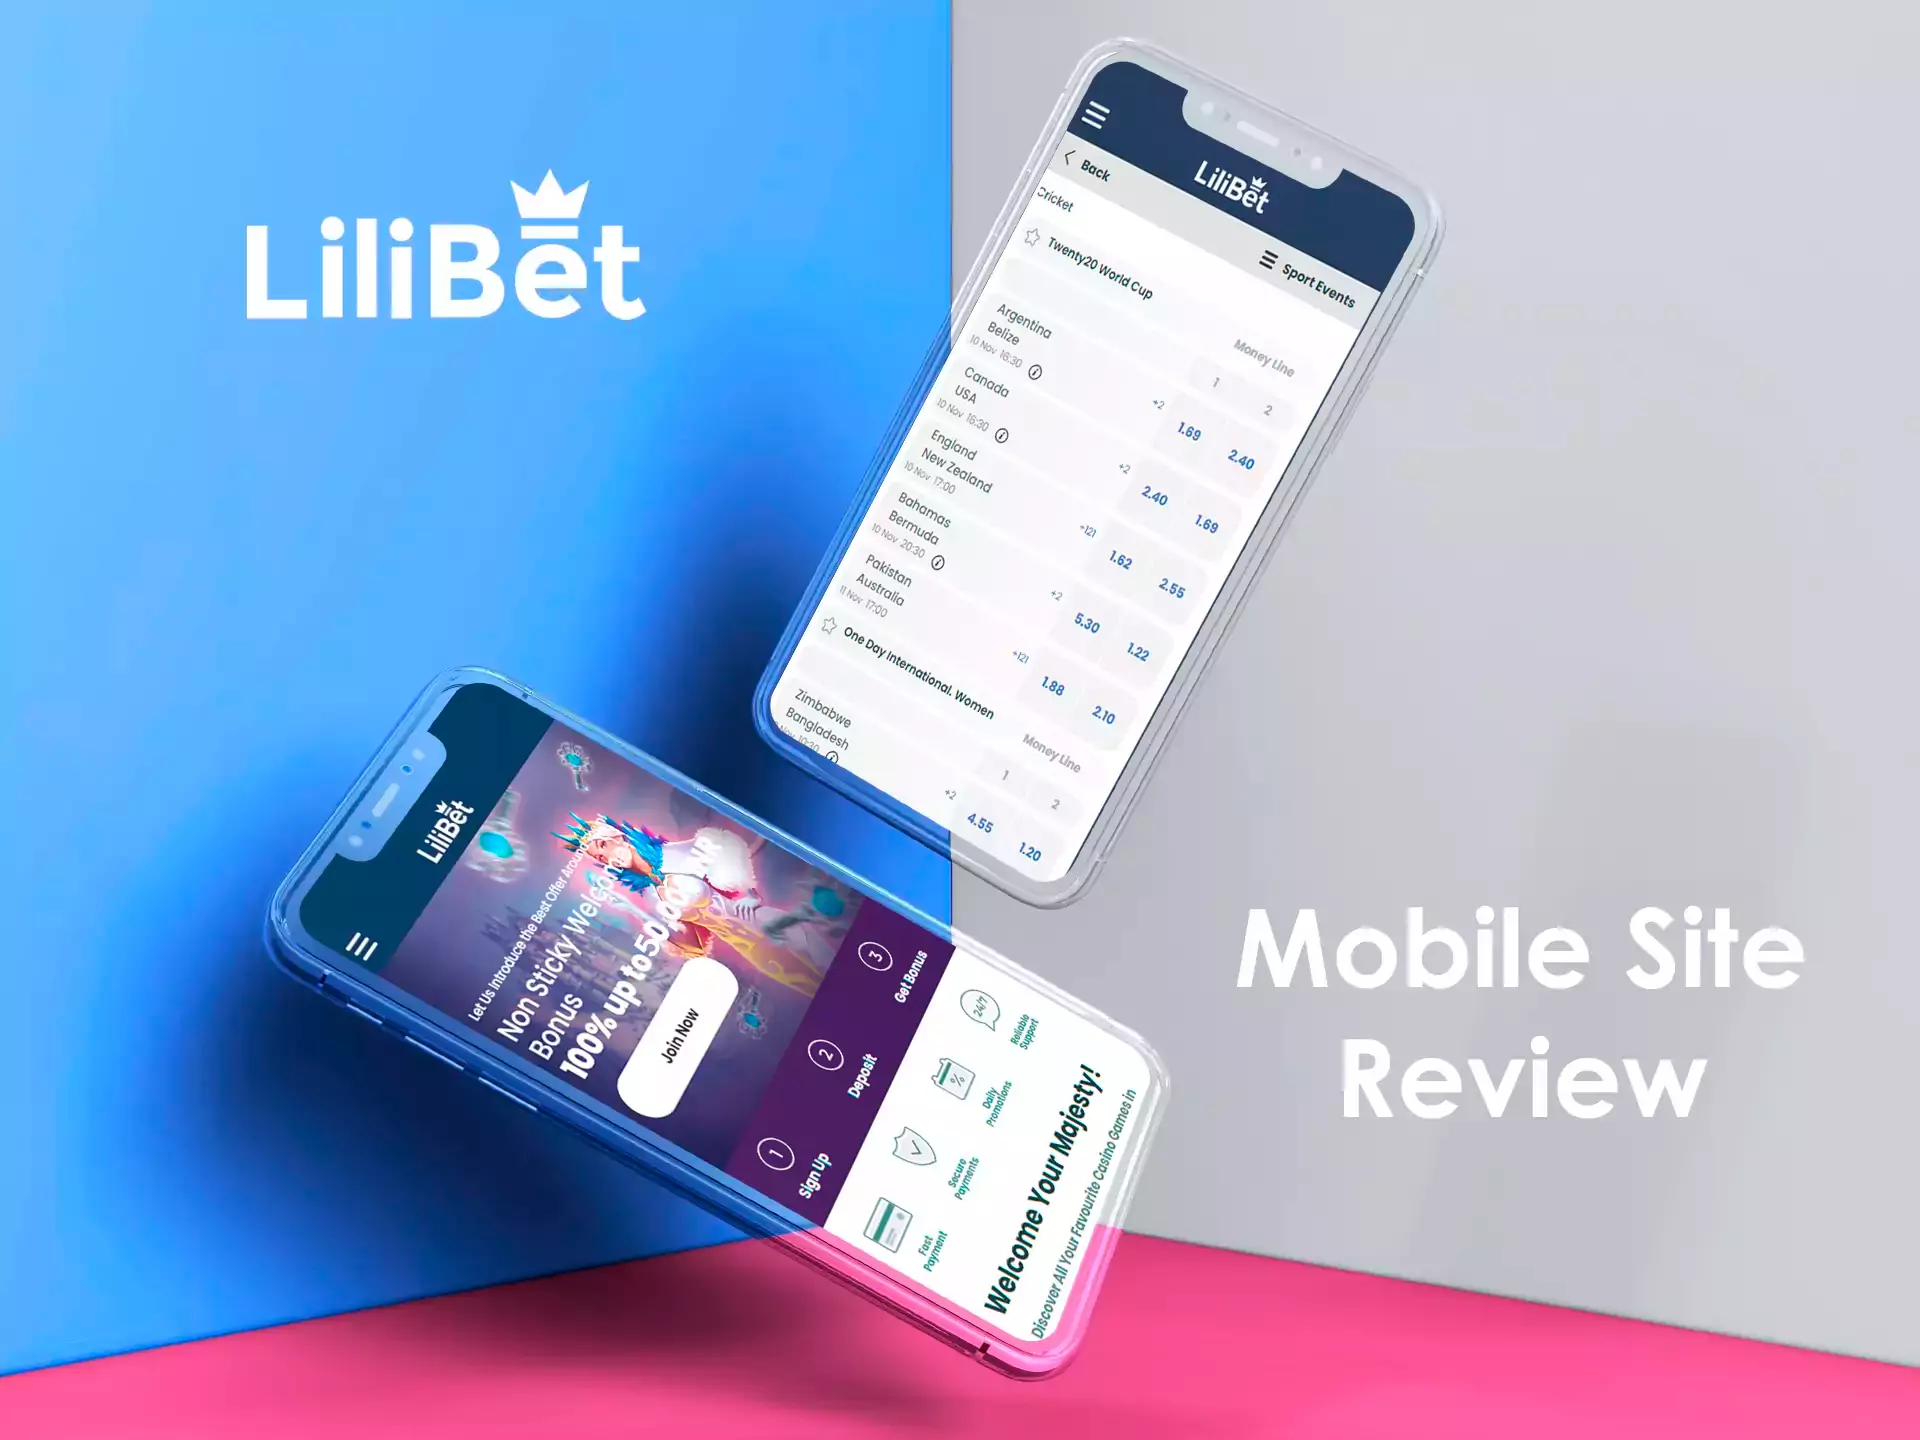 Lilibet doesn't have its own app but the browser version of the site works quickly and correctly.